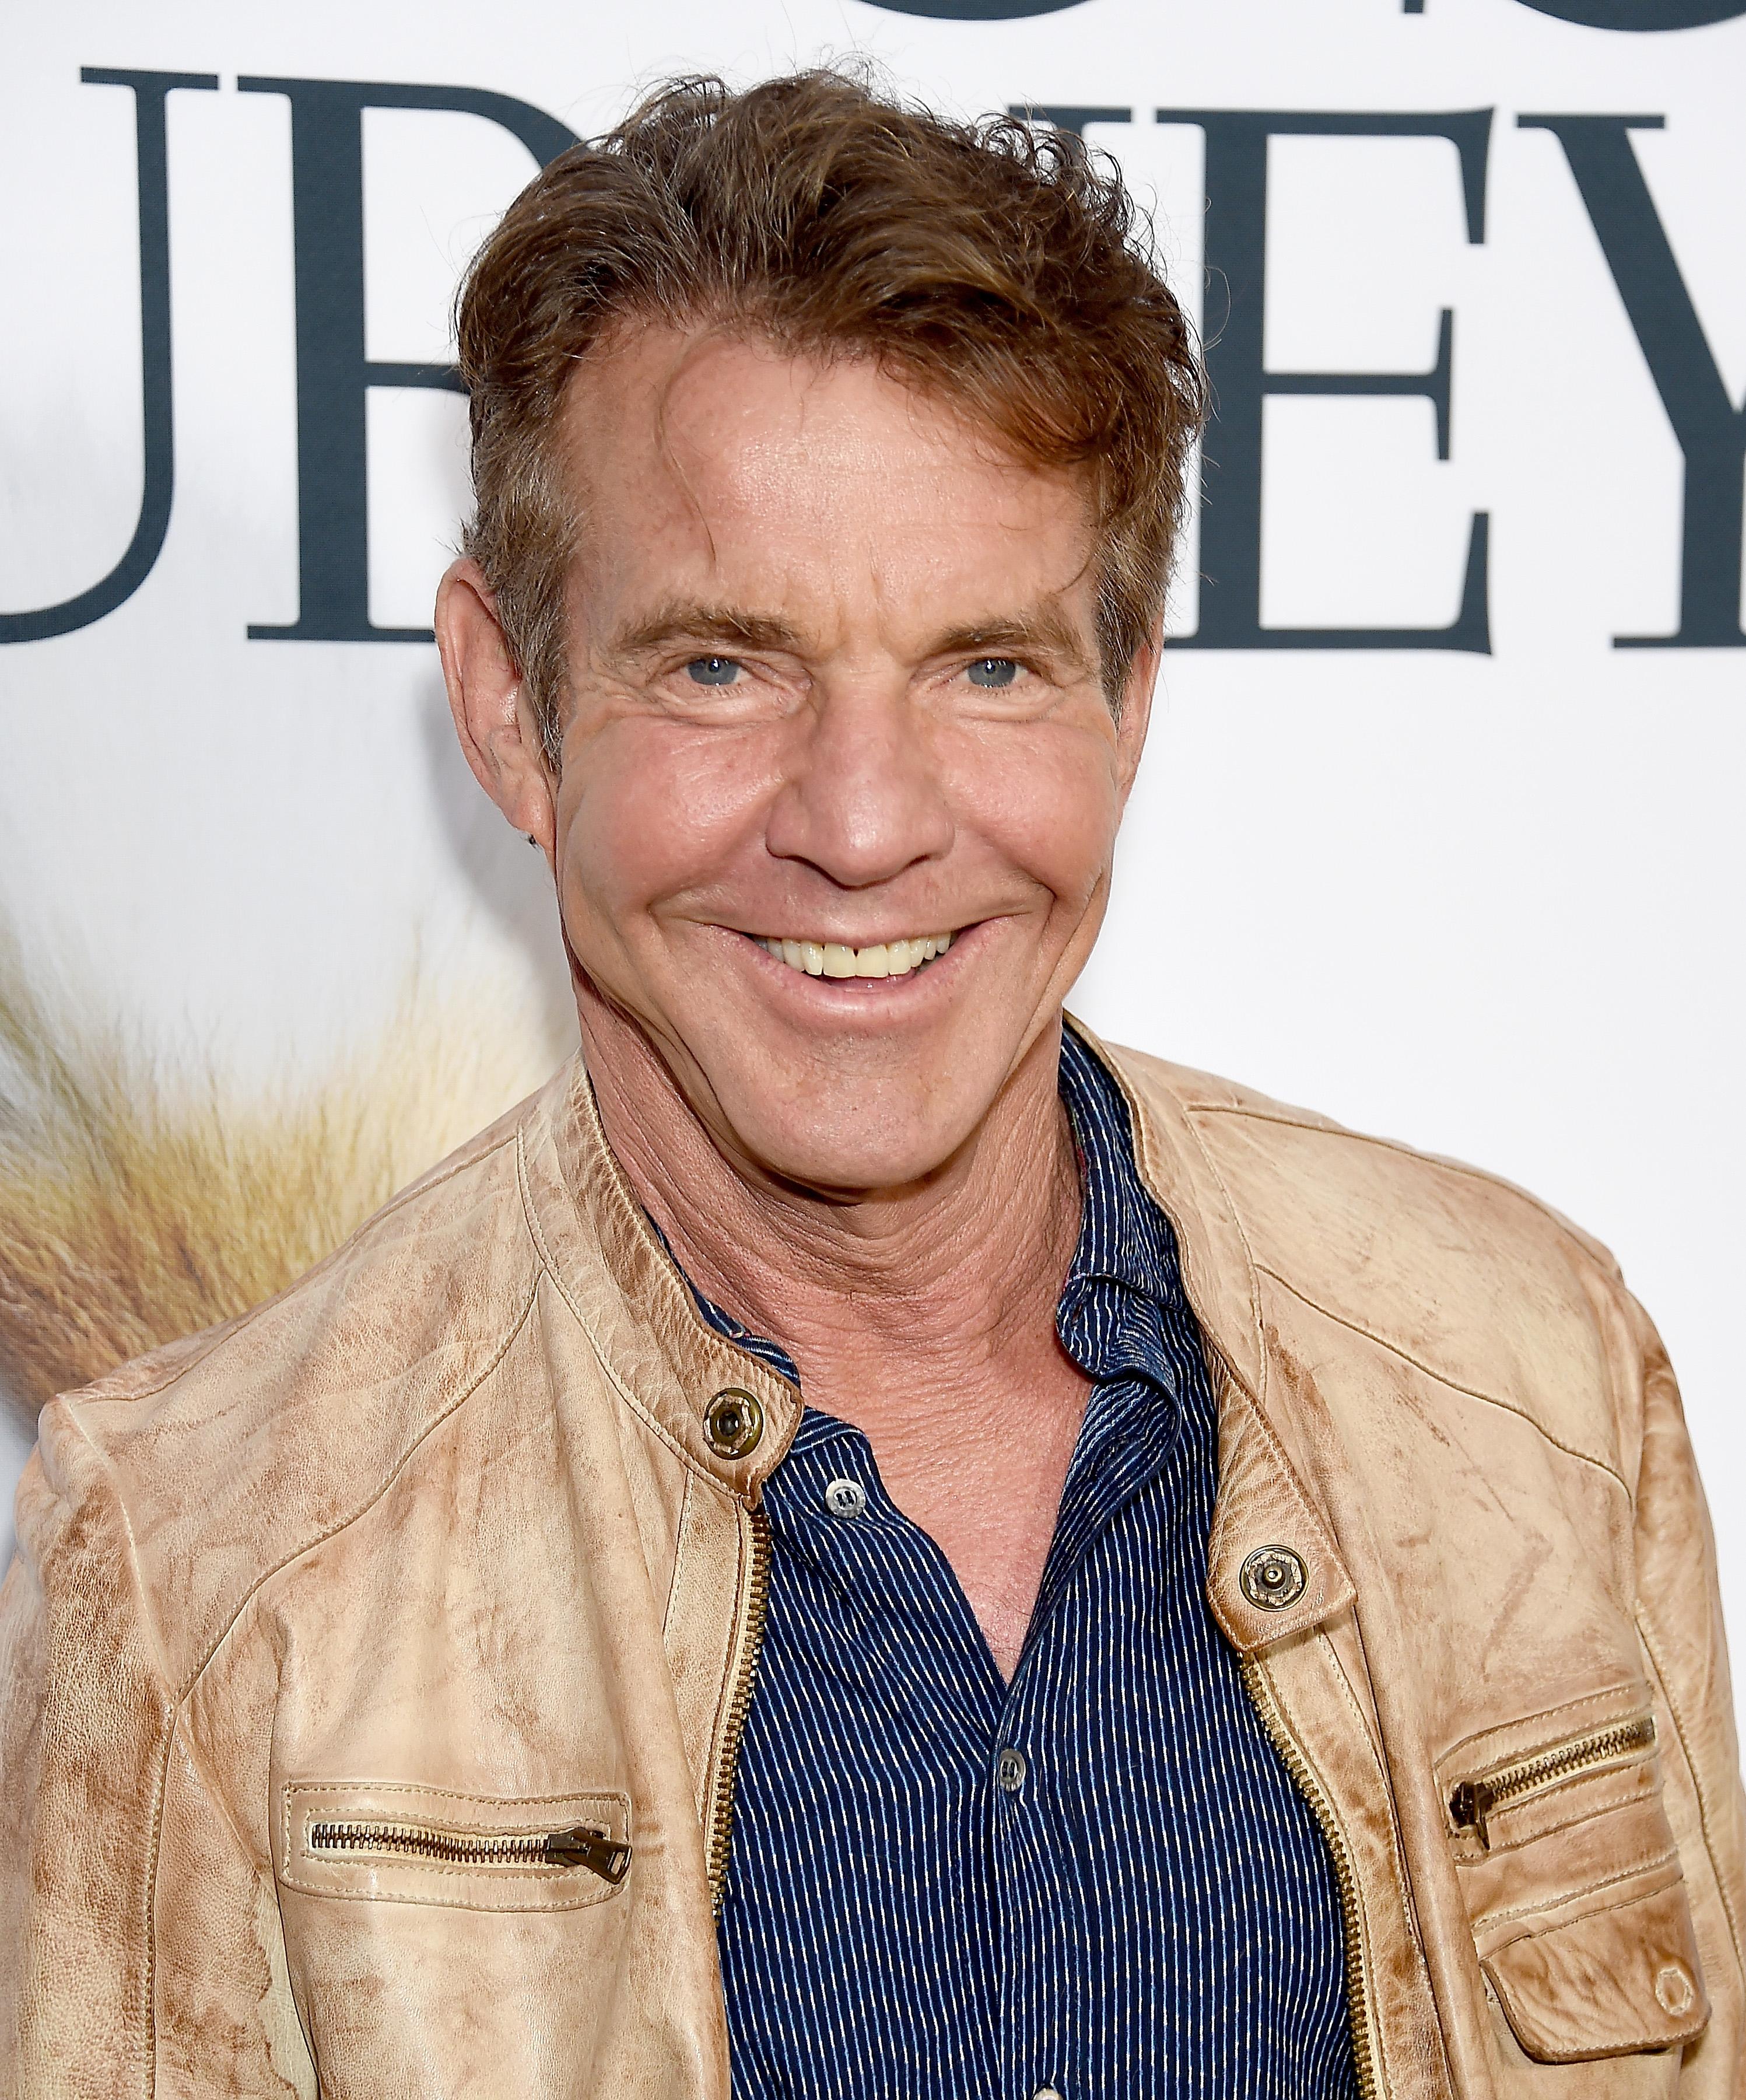 Dennis Quaid and Laura Savoie Are Engaged